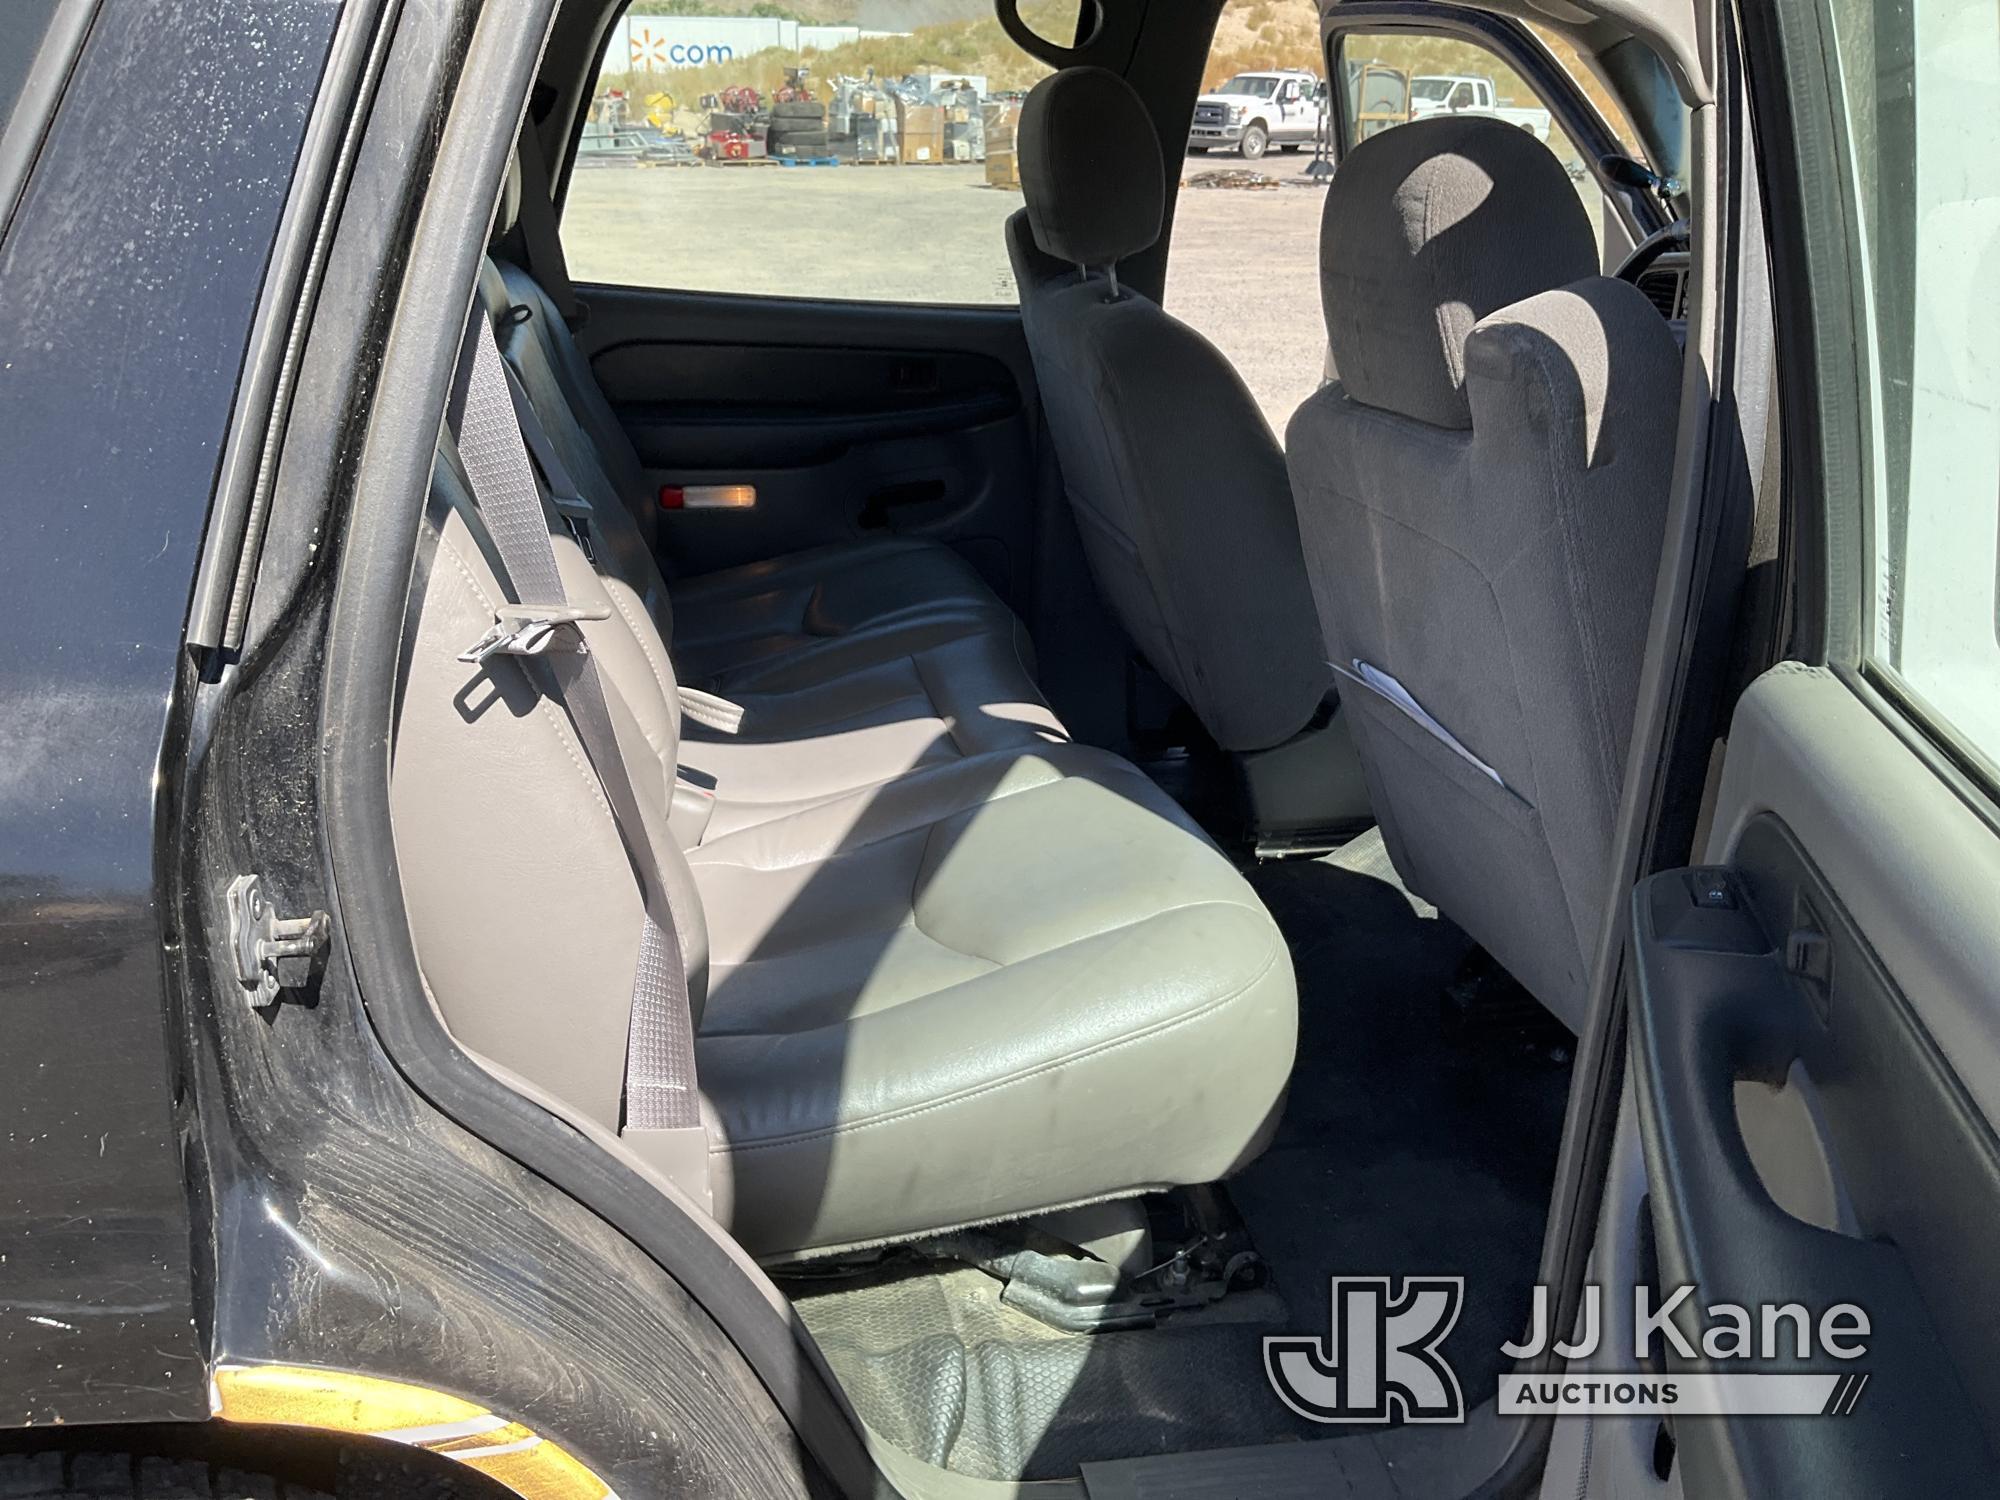 (McCarran, NV) 2003 Chevrolet Tahoe 4x4 4-Door Sport Utility Vehicle, Located In Reno Nv. Contact Na